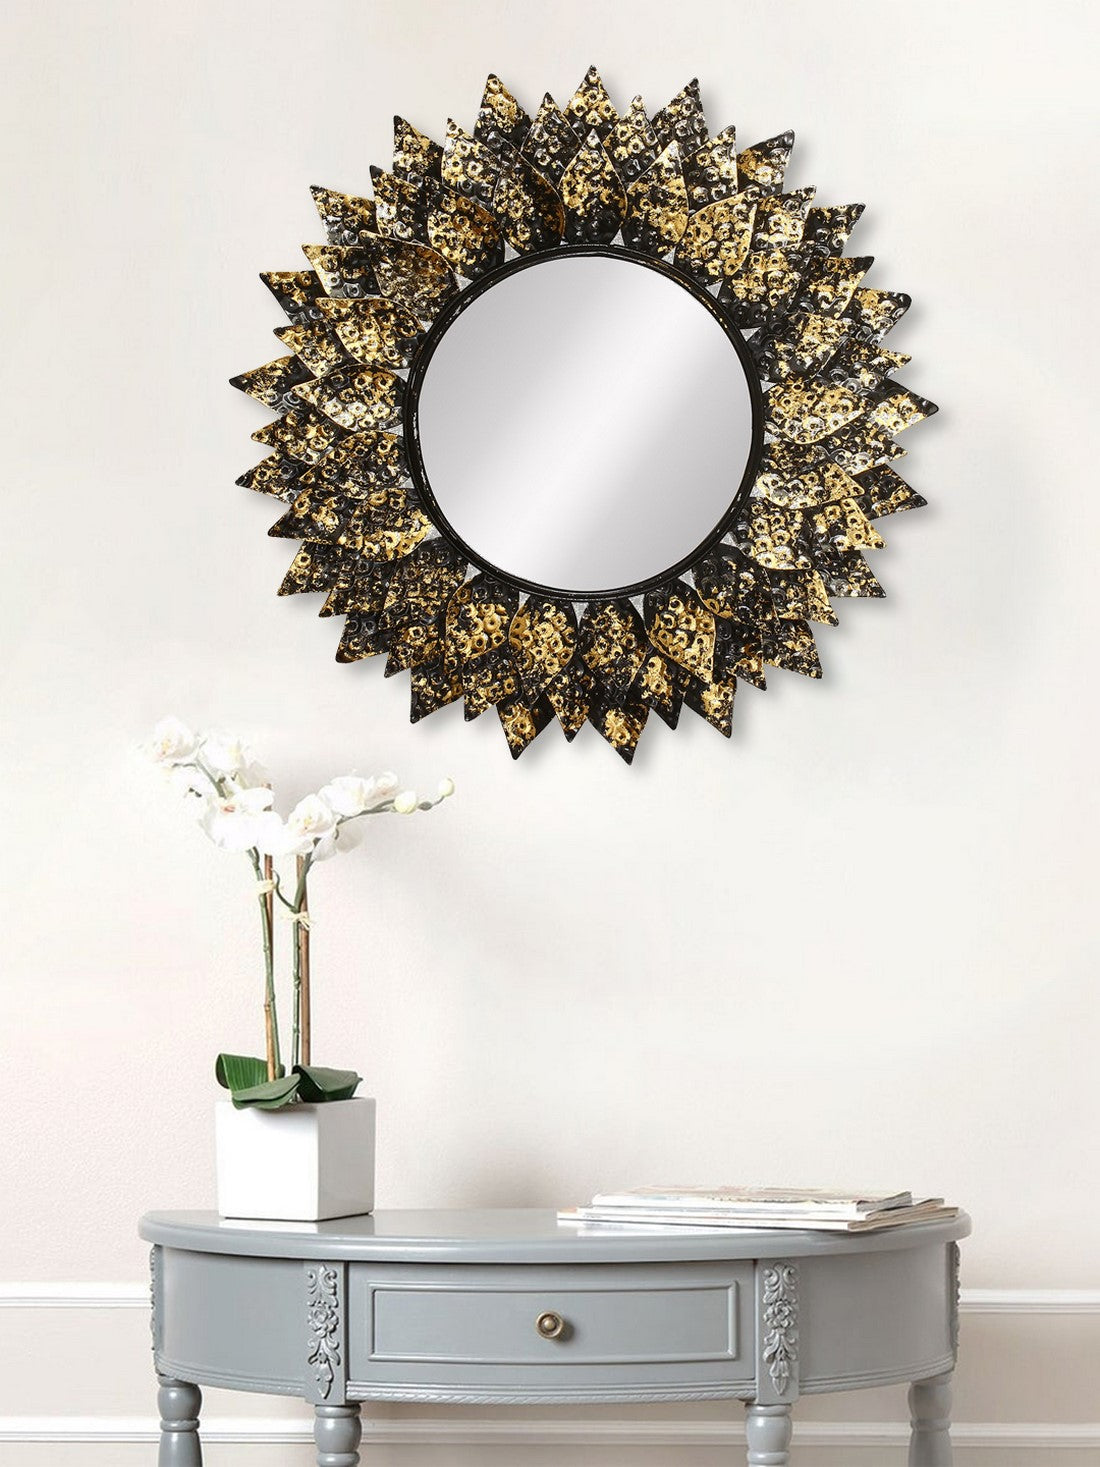 Golden and Black Decorative Metal Handcarved Wall Mirror